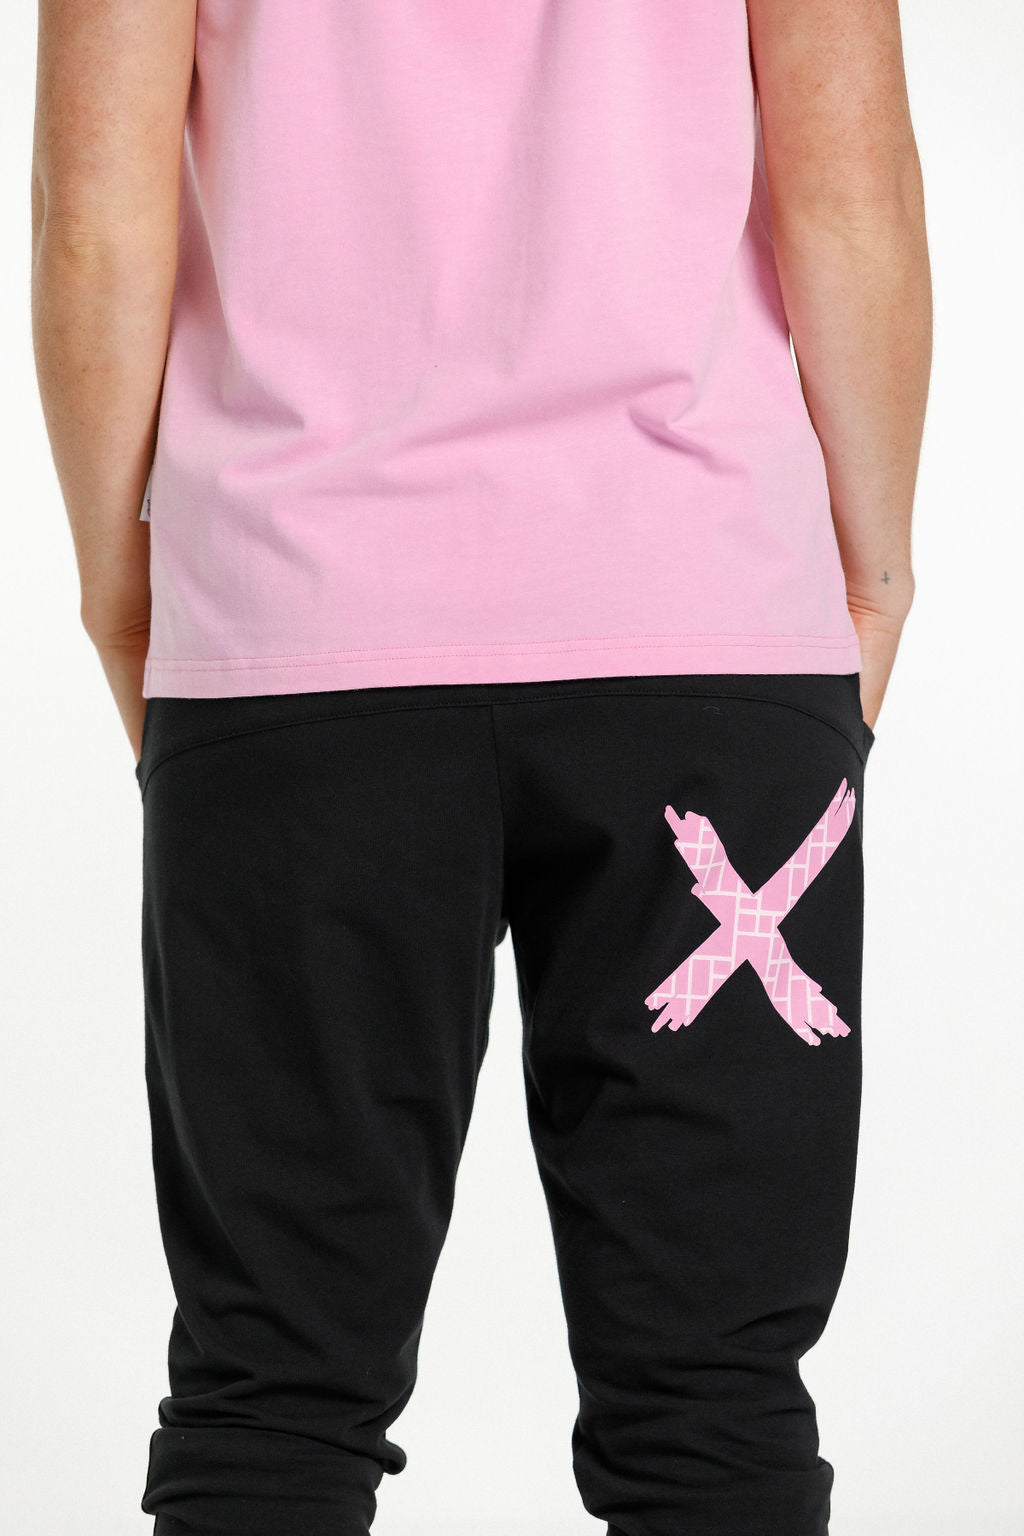 Home Lee Apartment Pants Black with Pink Bloom